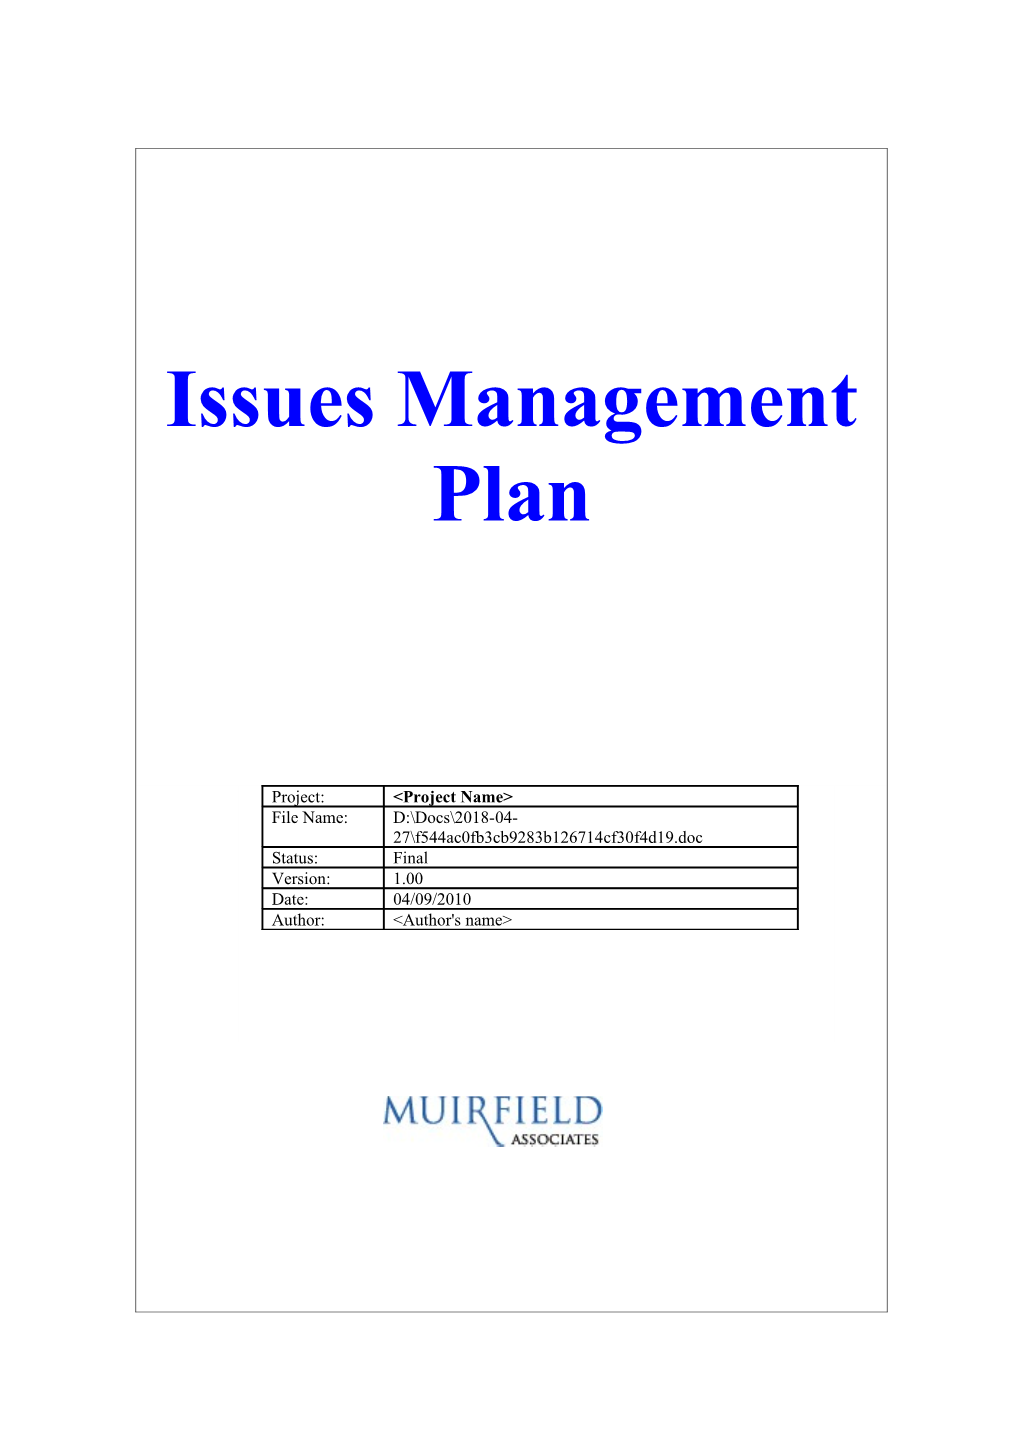 Issues Management Plan